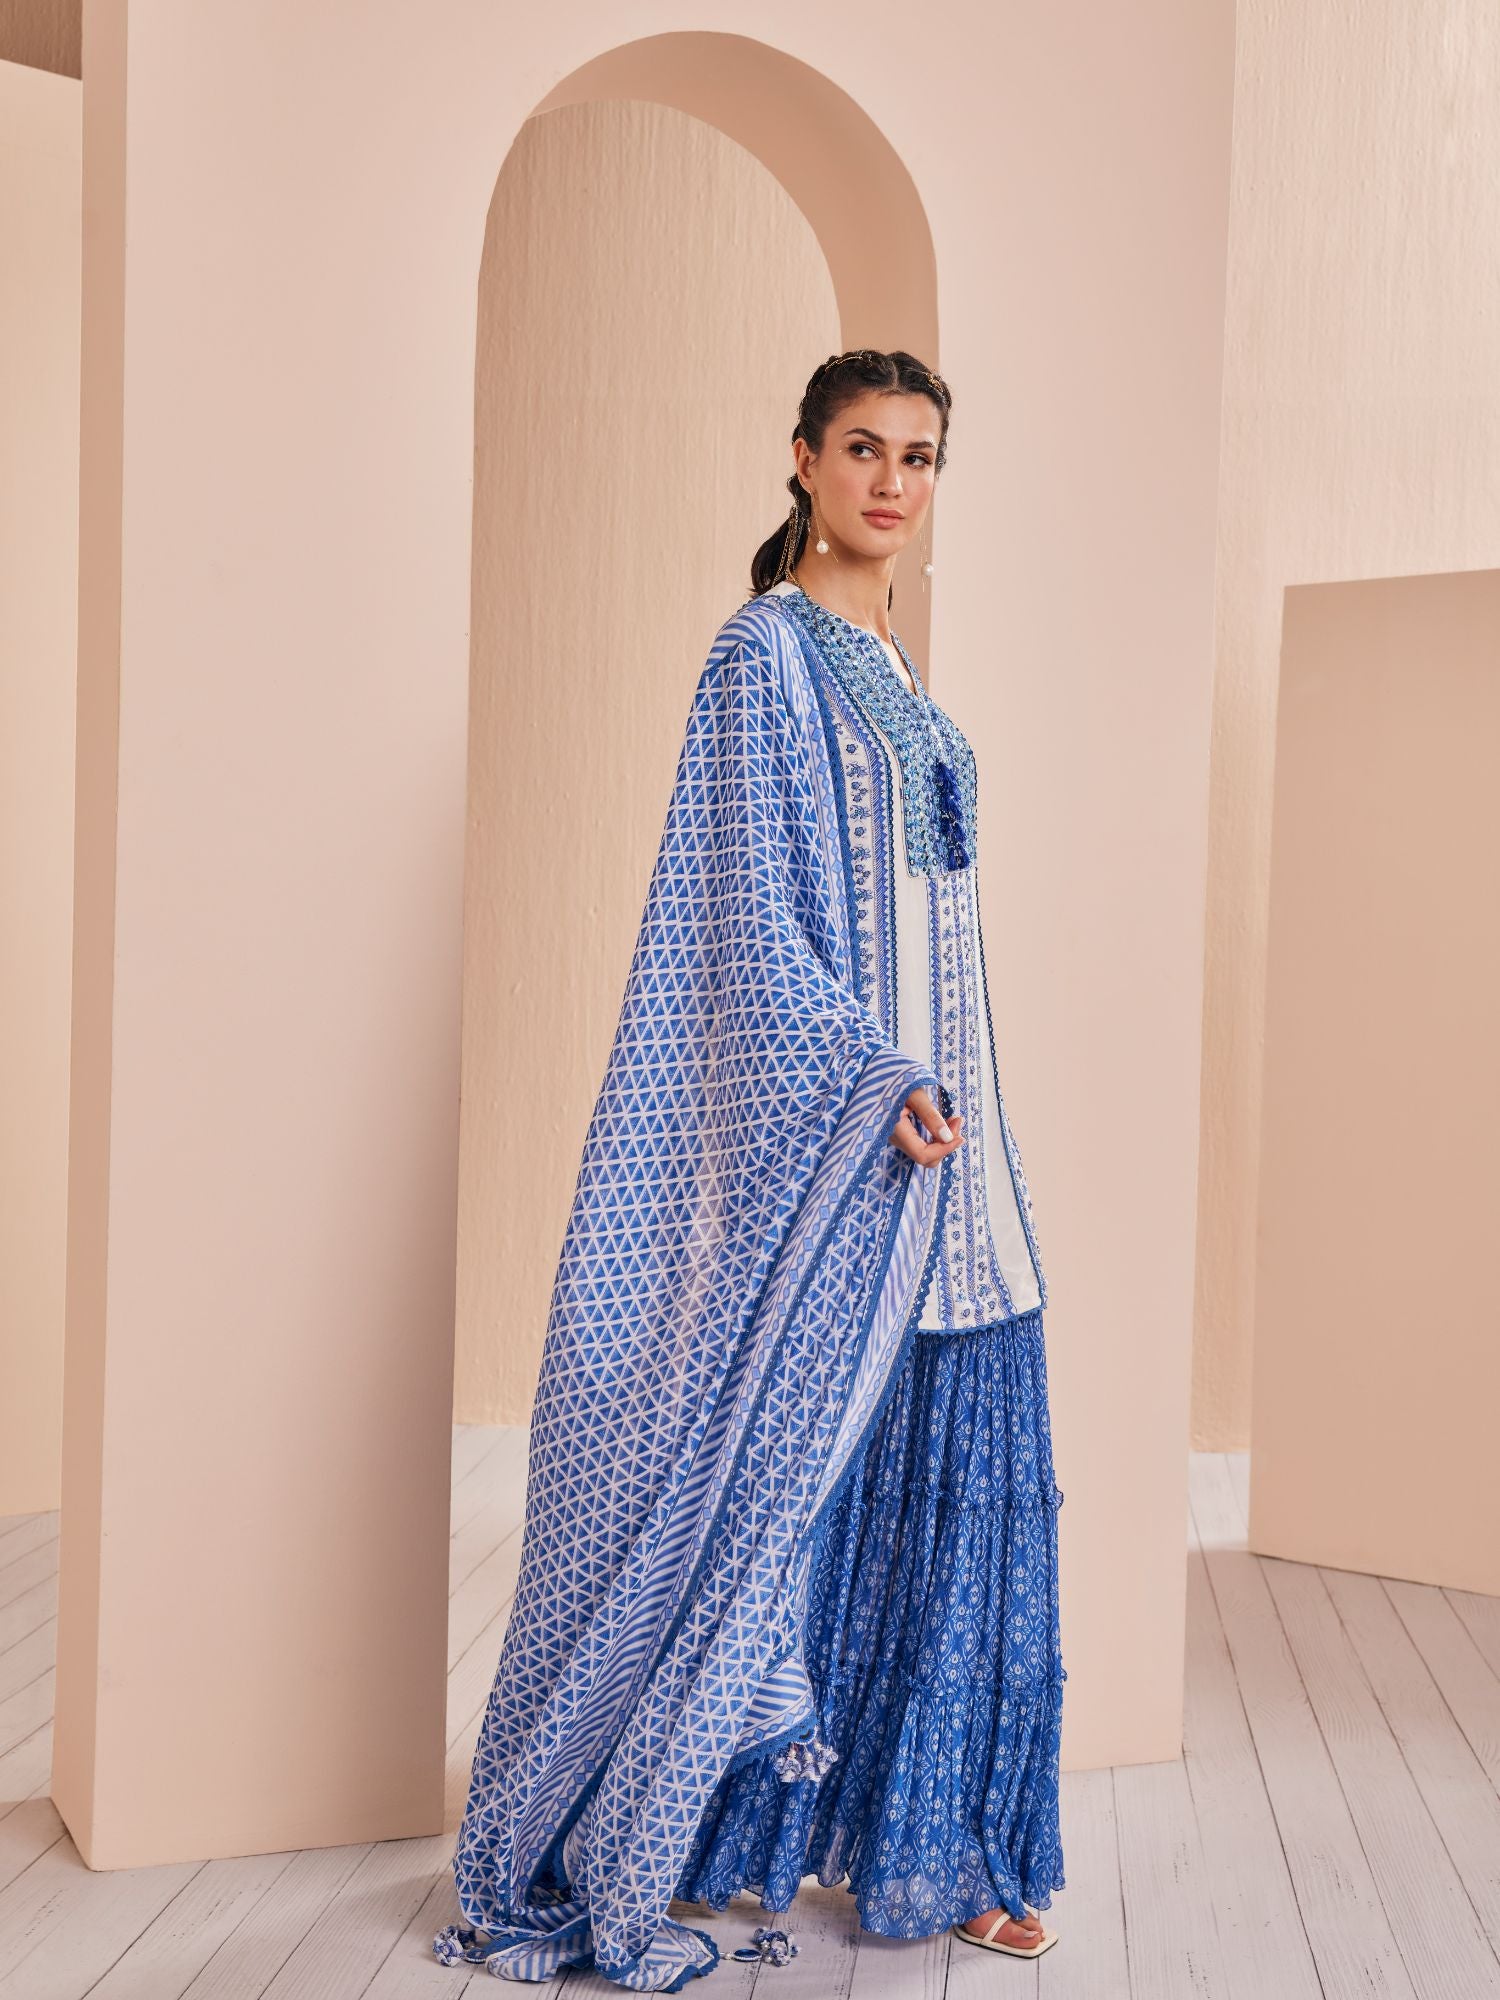 Blue perwinkle border kurta paired with tiered sharara and dupatta